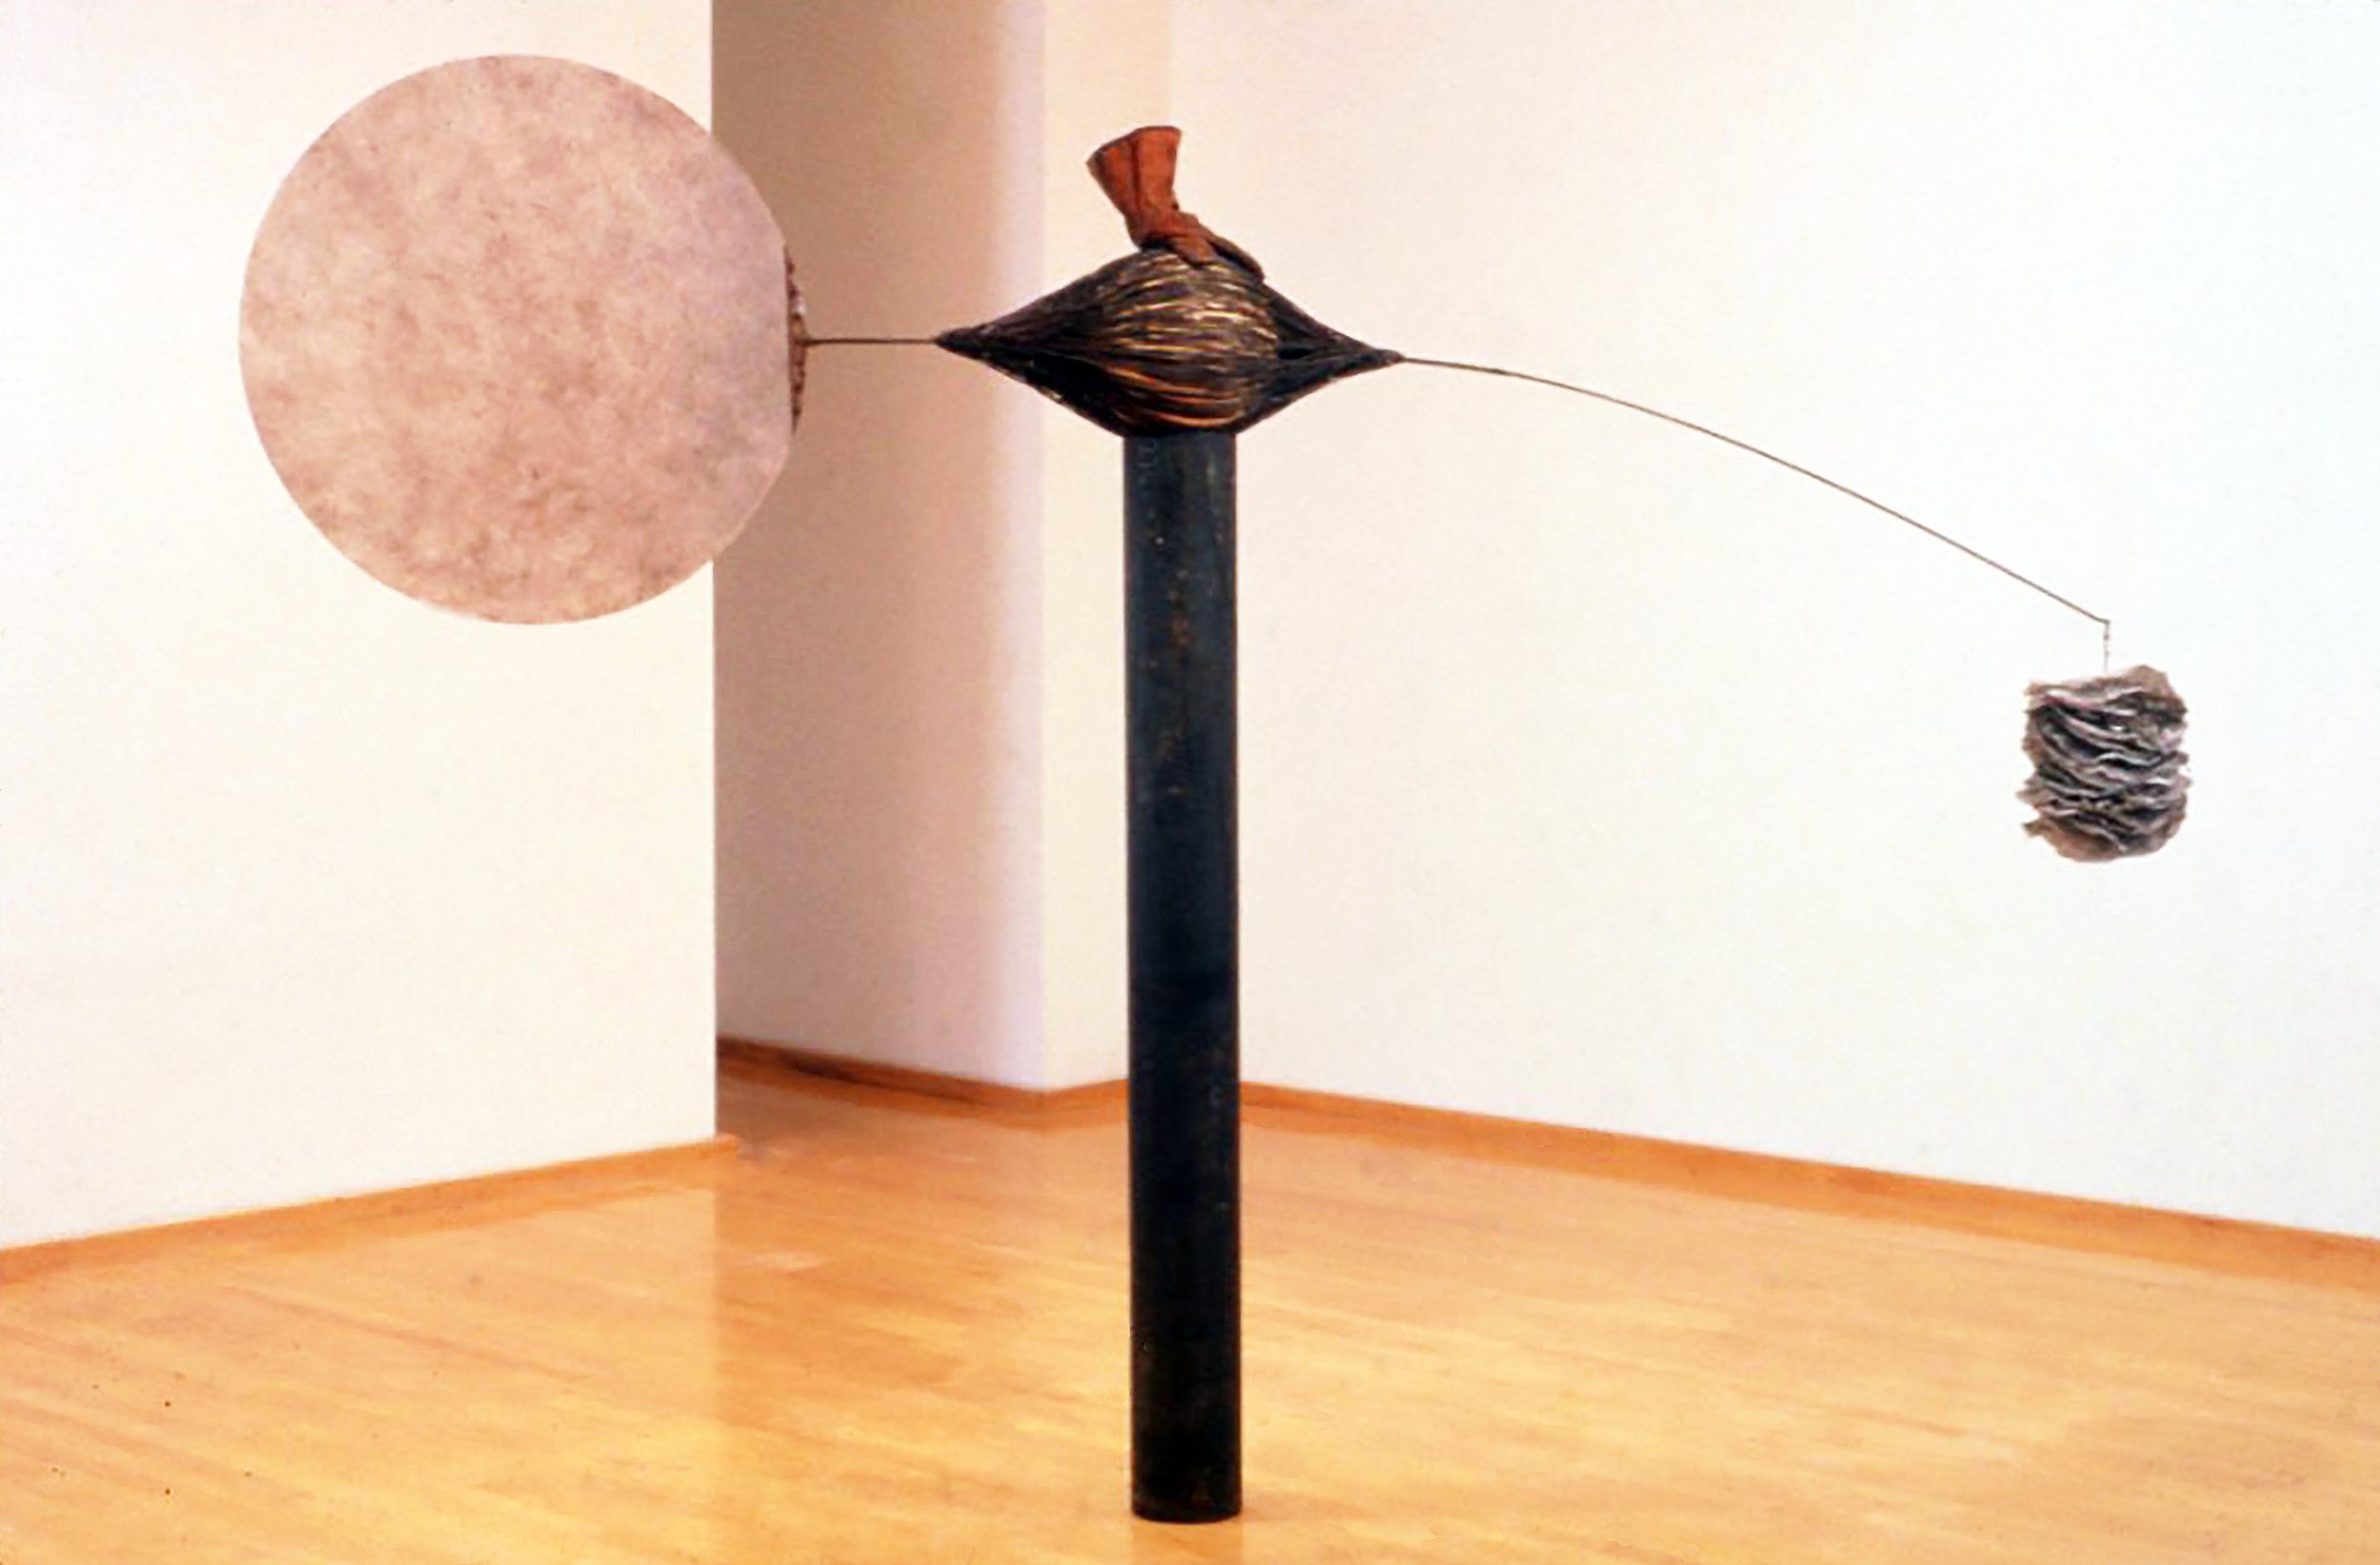  In The Balance II, 1993, 80 x 120 x 11 inches   One of the strongest sculptures in this recent show, In The Balance II, measures a stack of ruffled wire-mesh disks against a large, upright fiberglass plate whose shape and position suggest a gong, ex